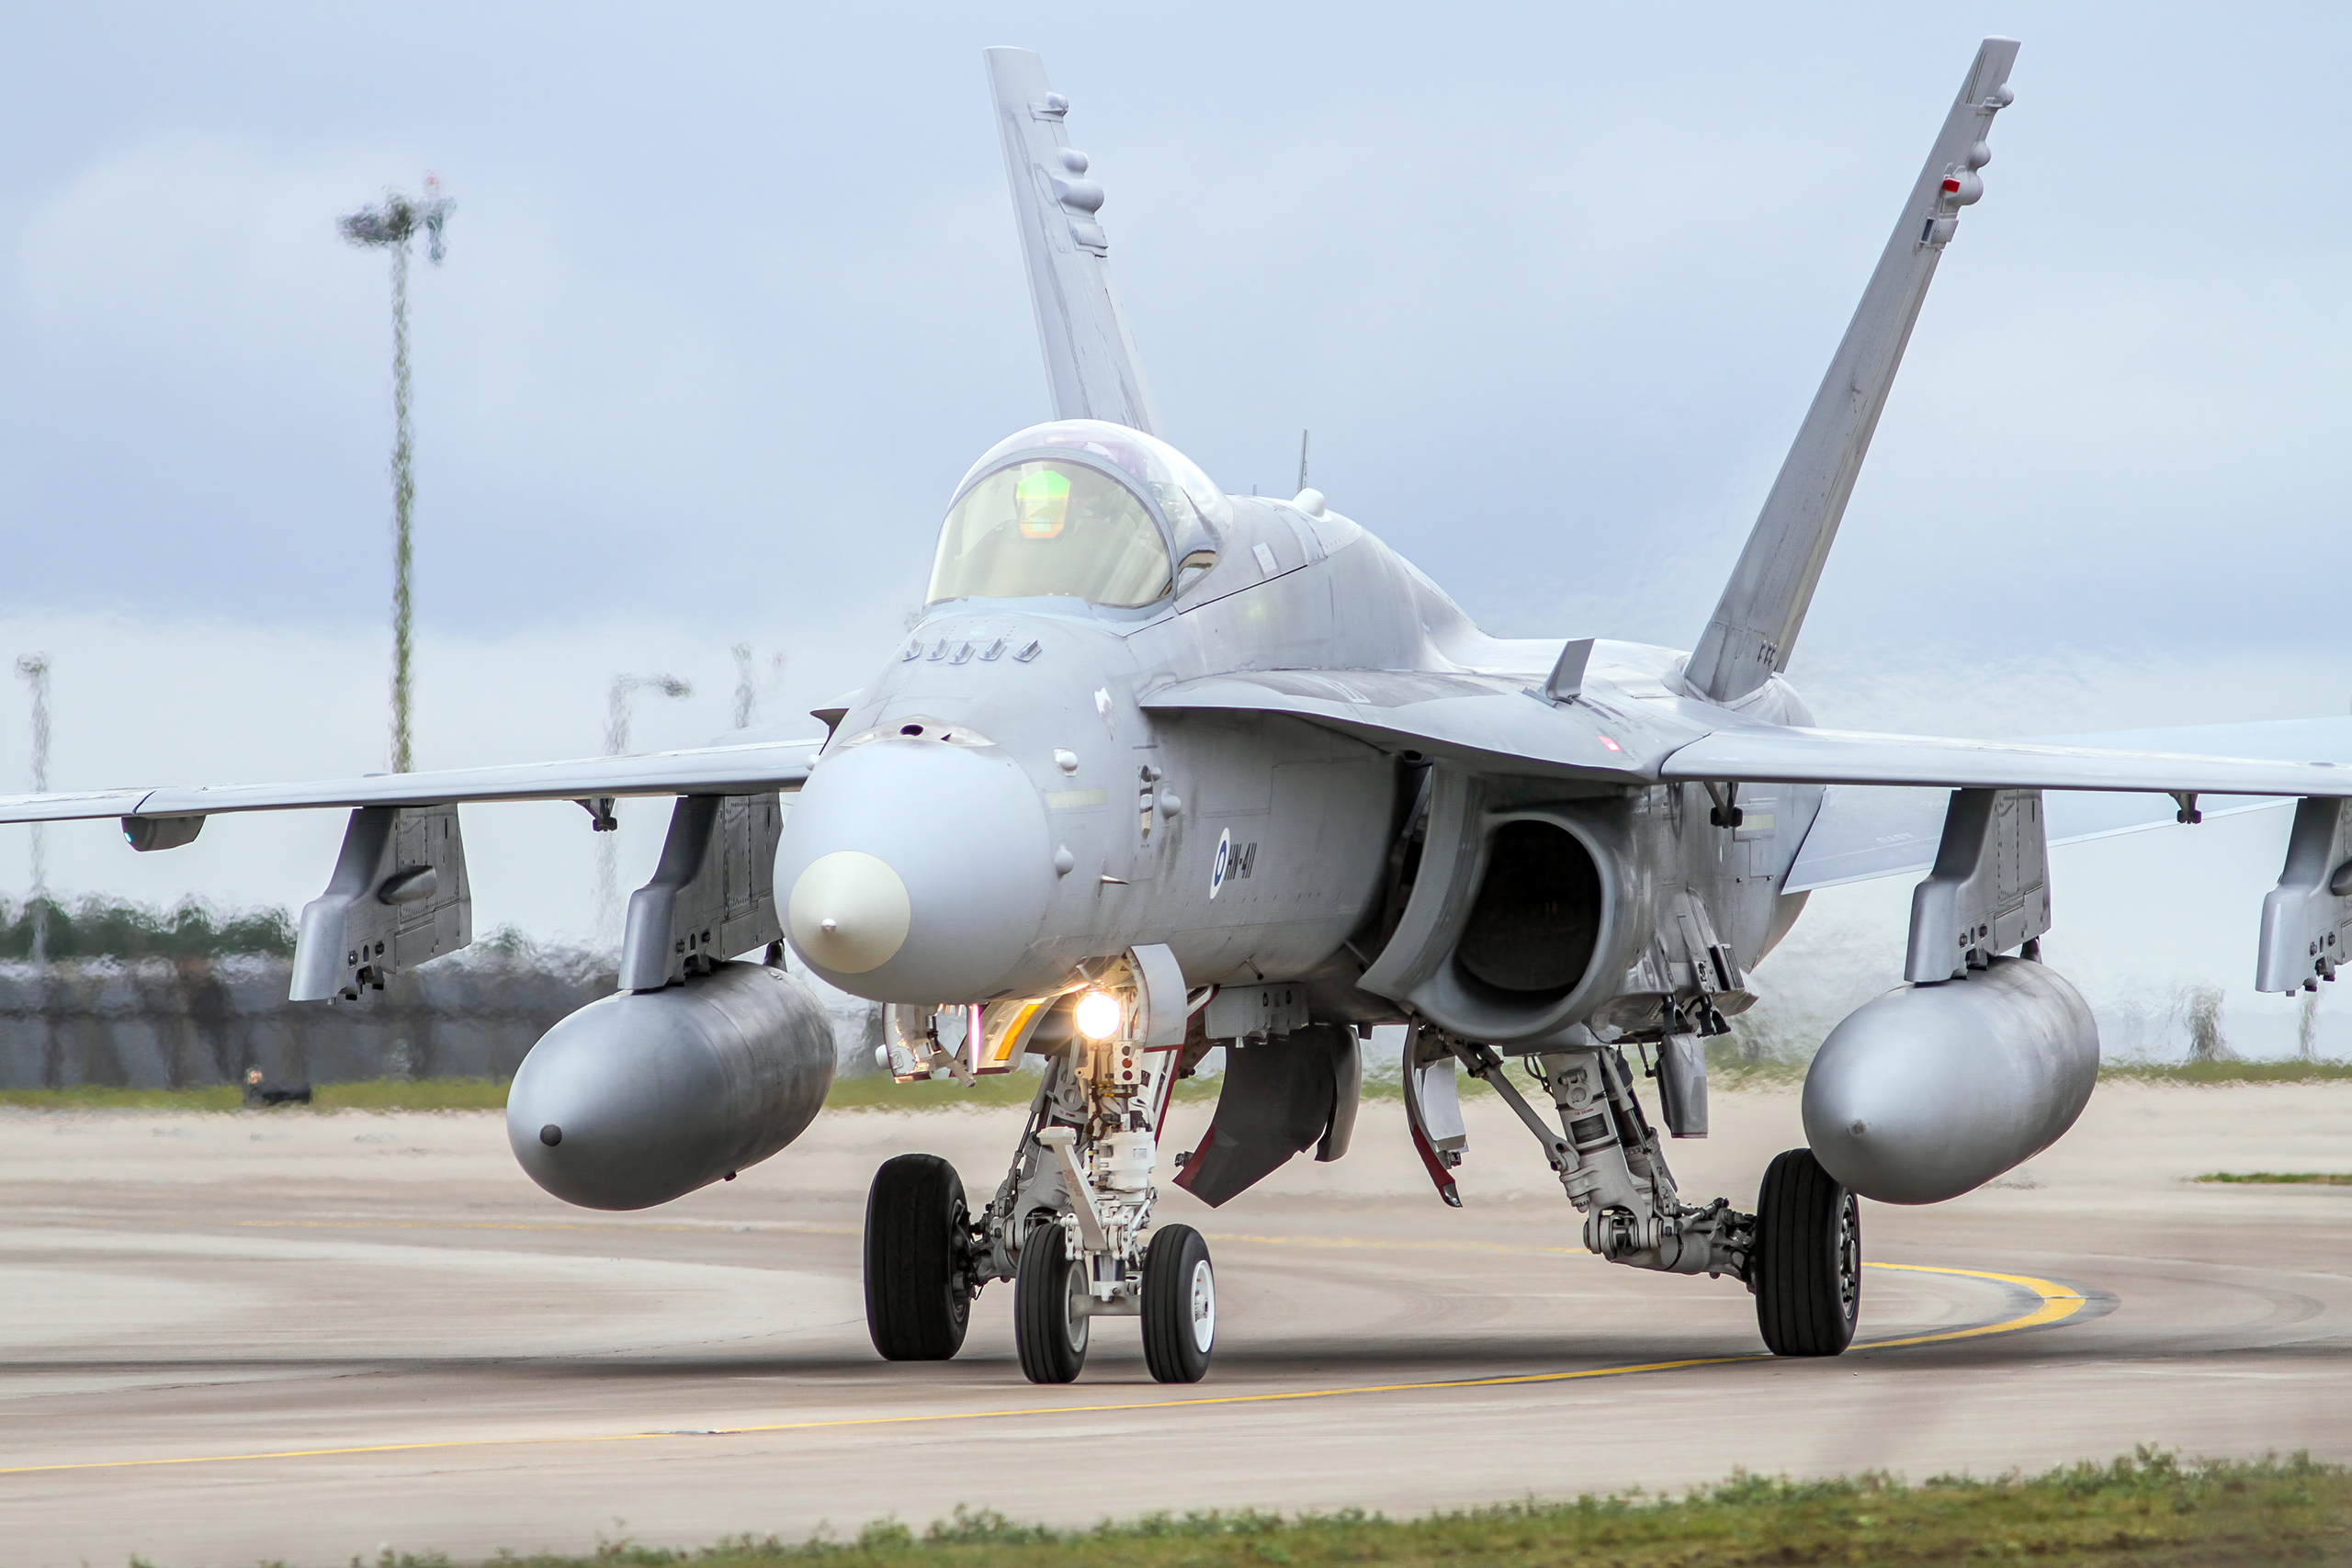 Boeing F/A-18C HORNET / Finnish Air Force - © by Gary Parsons